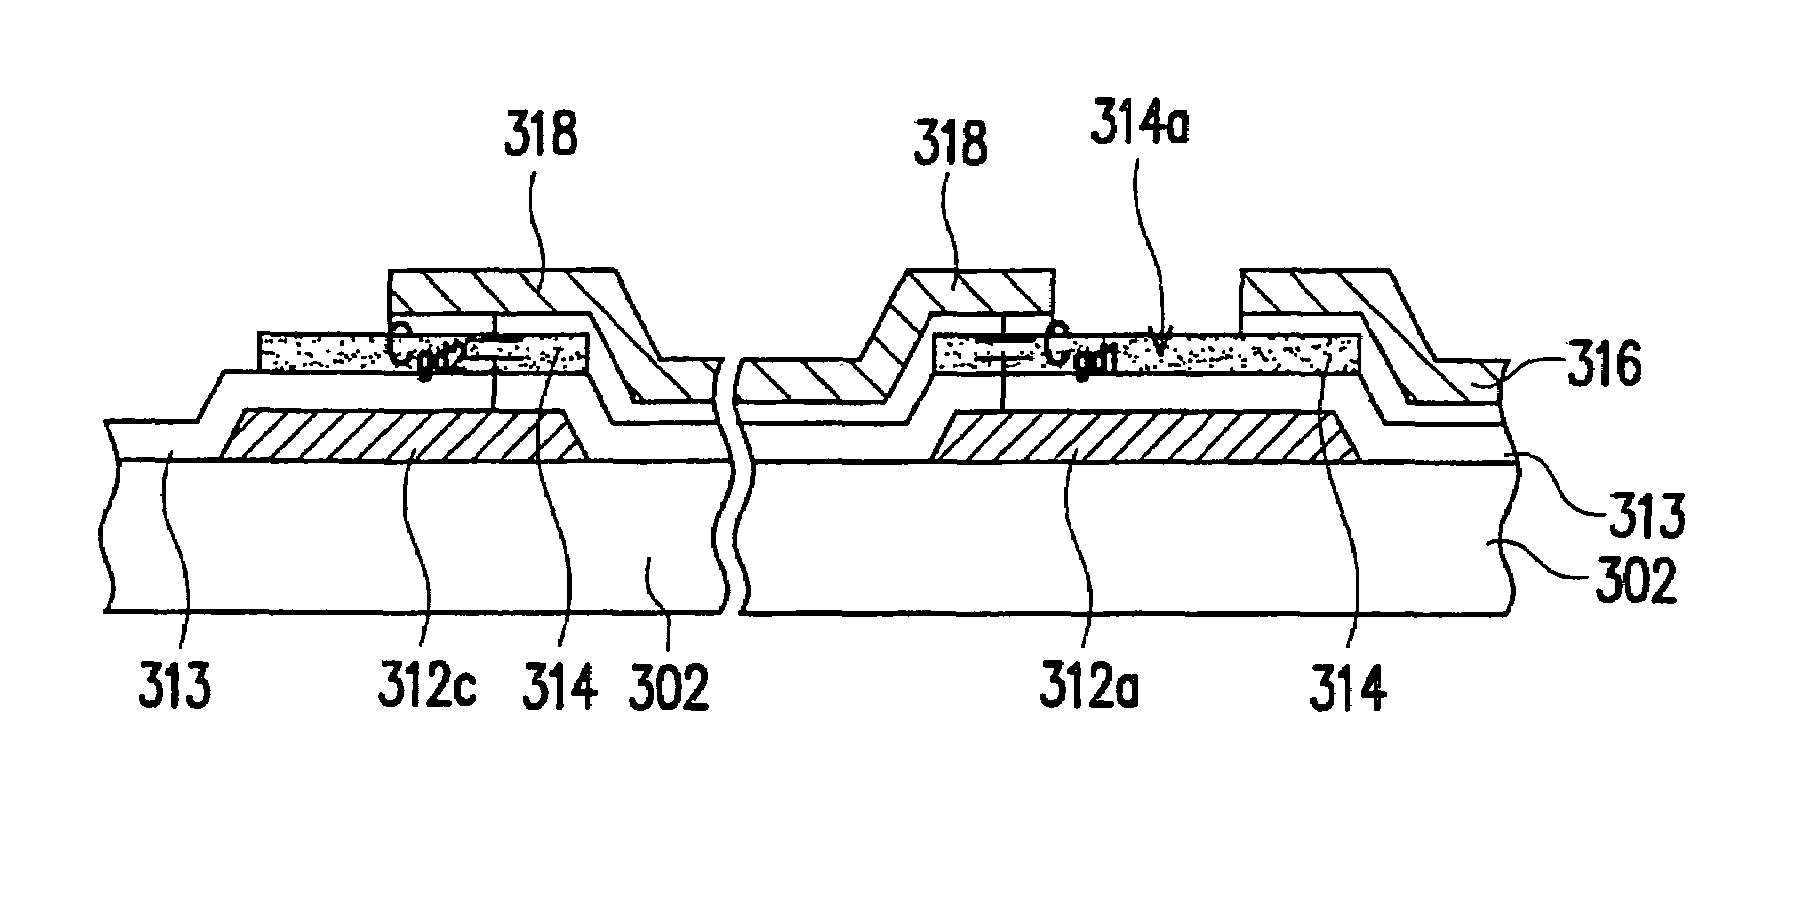 Thin film transistor, thin film transistor array and repairing method thereof